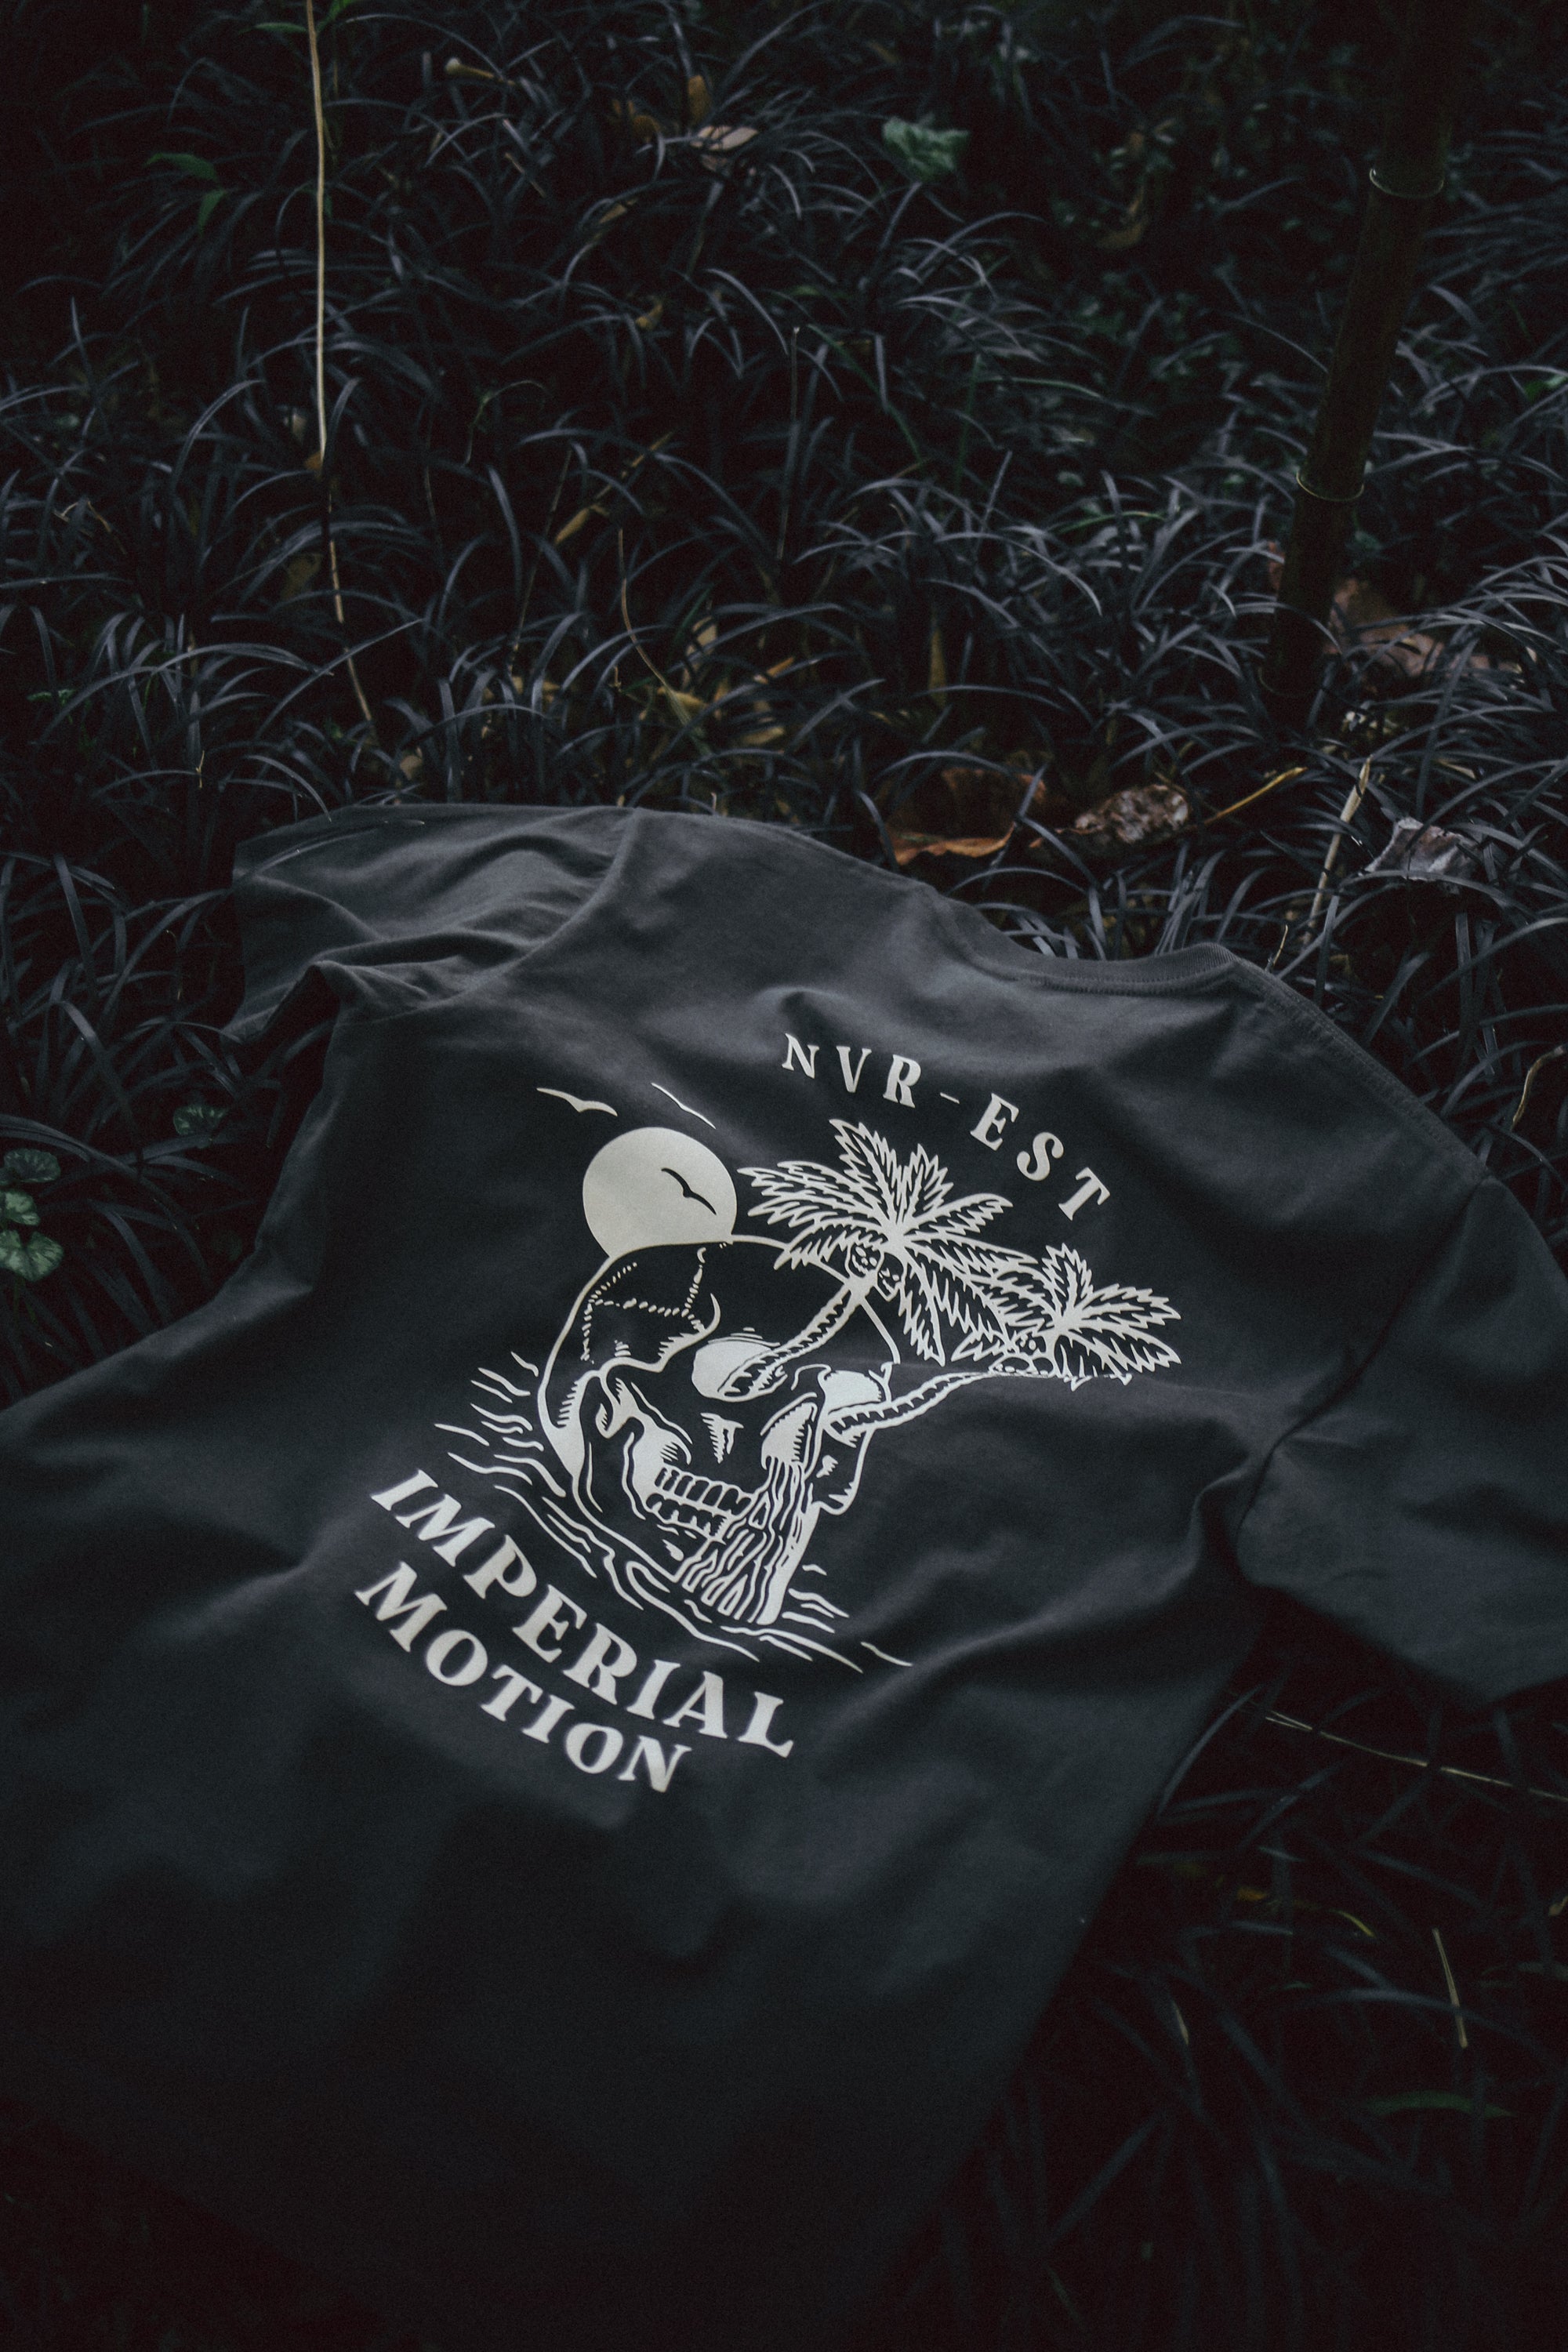 Mens Tees & Tanks // Free Shipping and Free Returns | IM – Imperial Motion